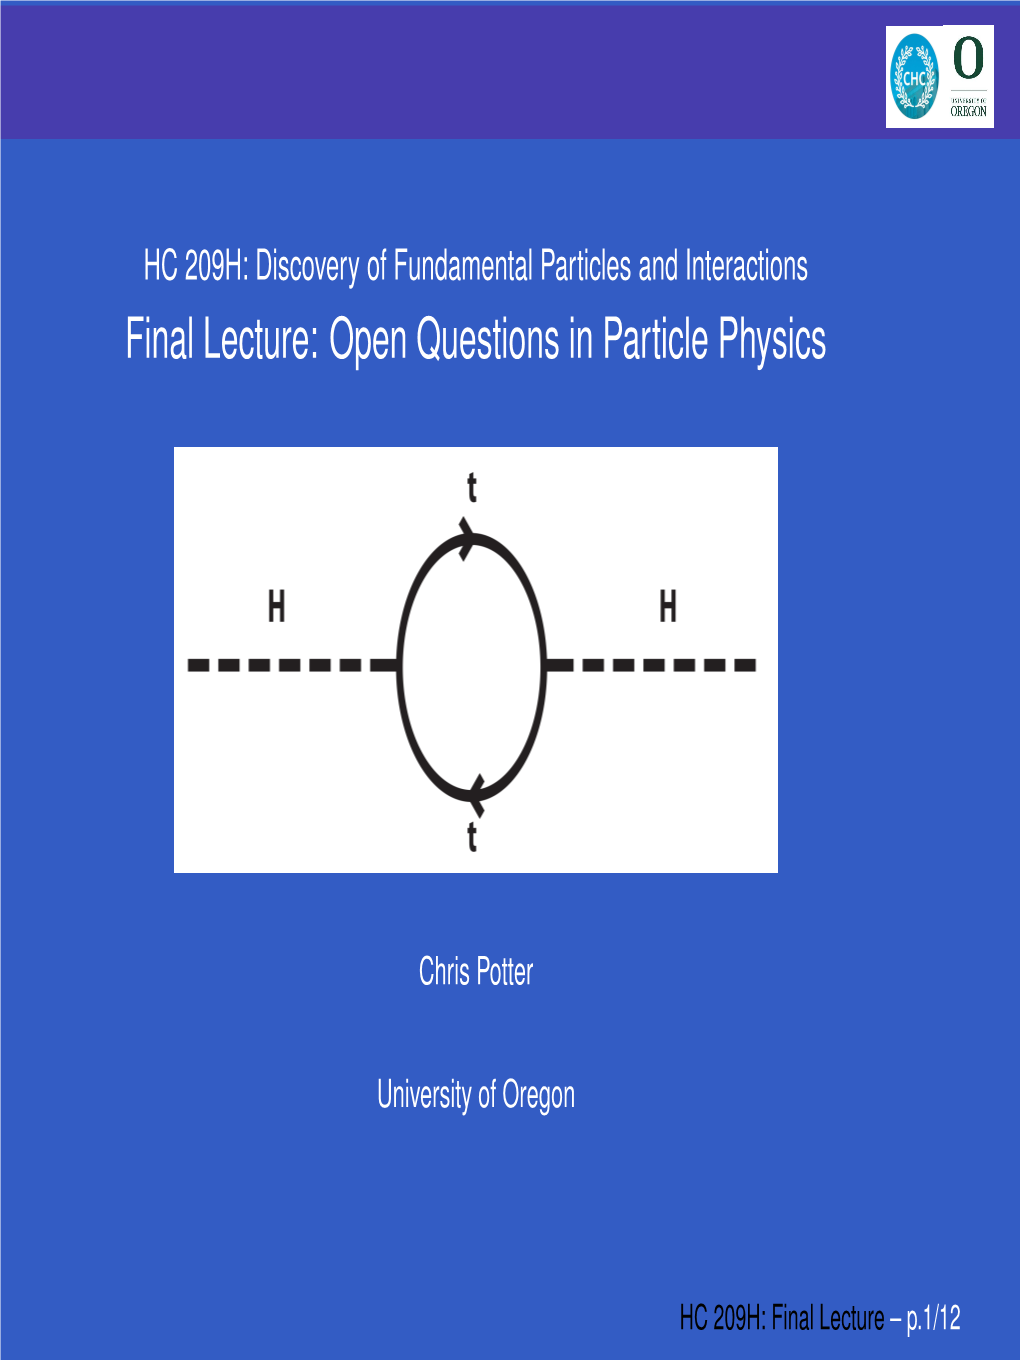 Final Lecture: Open Questions in Particle Physics